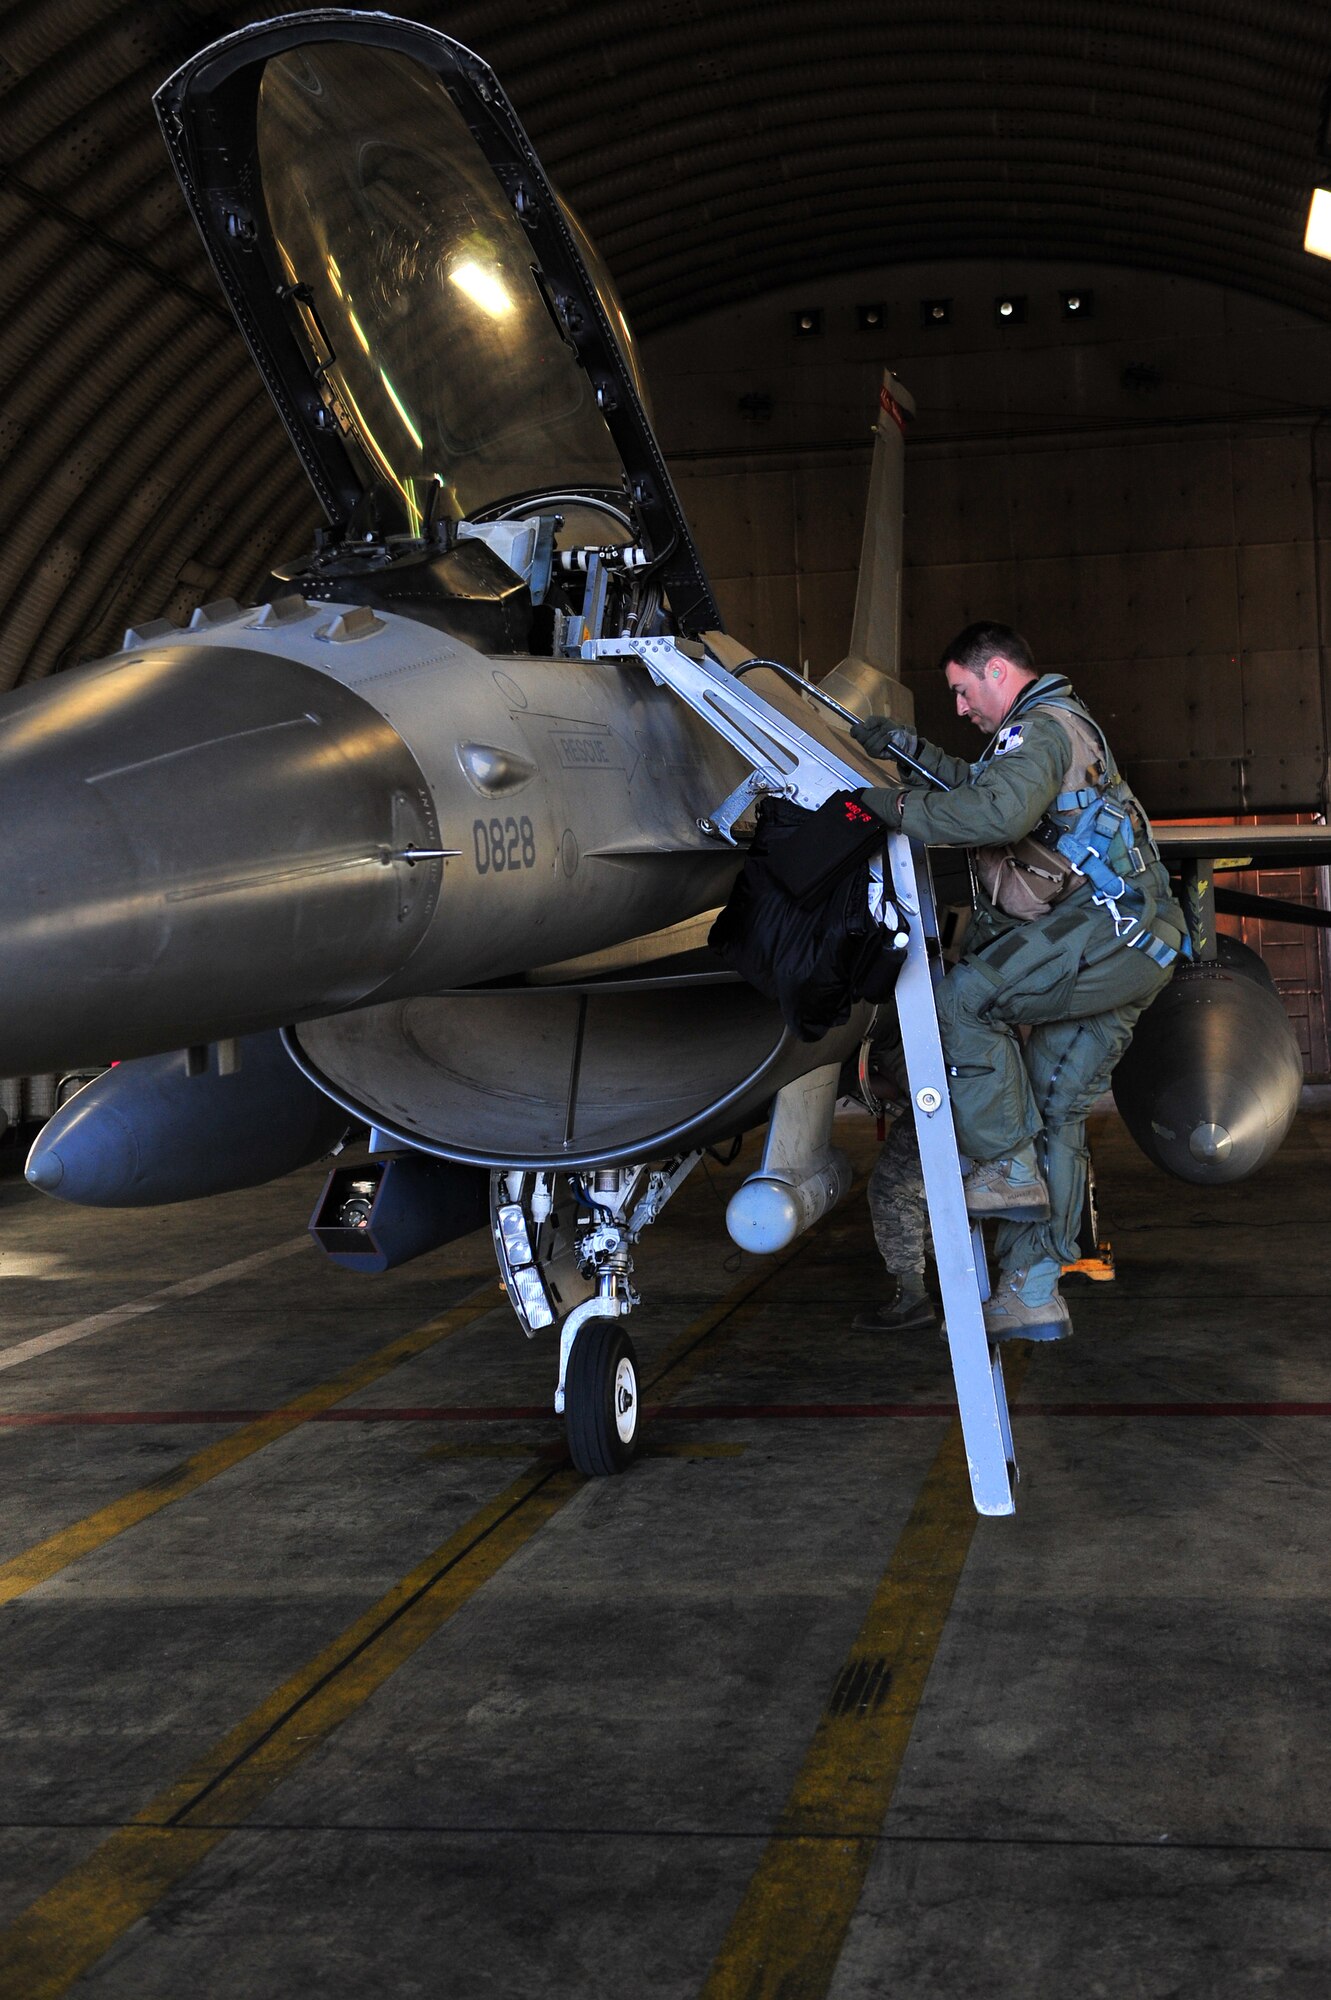 SPANGDAHLEM AIR BASE, Germany – Capt. Matthew Clayton, 480th Fighter Squadron pilot, climbs aboard an F-16 Fighting Falcon on the flight line here Aug. 23 before departing for Nordic Air Meet 2012. The fighter squadron departed for the multi-national training exercise to share and exchange new combat tactics with allied countries. (U.S. Air Force photo by Airman 1st Class Dillon Davis/Released)